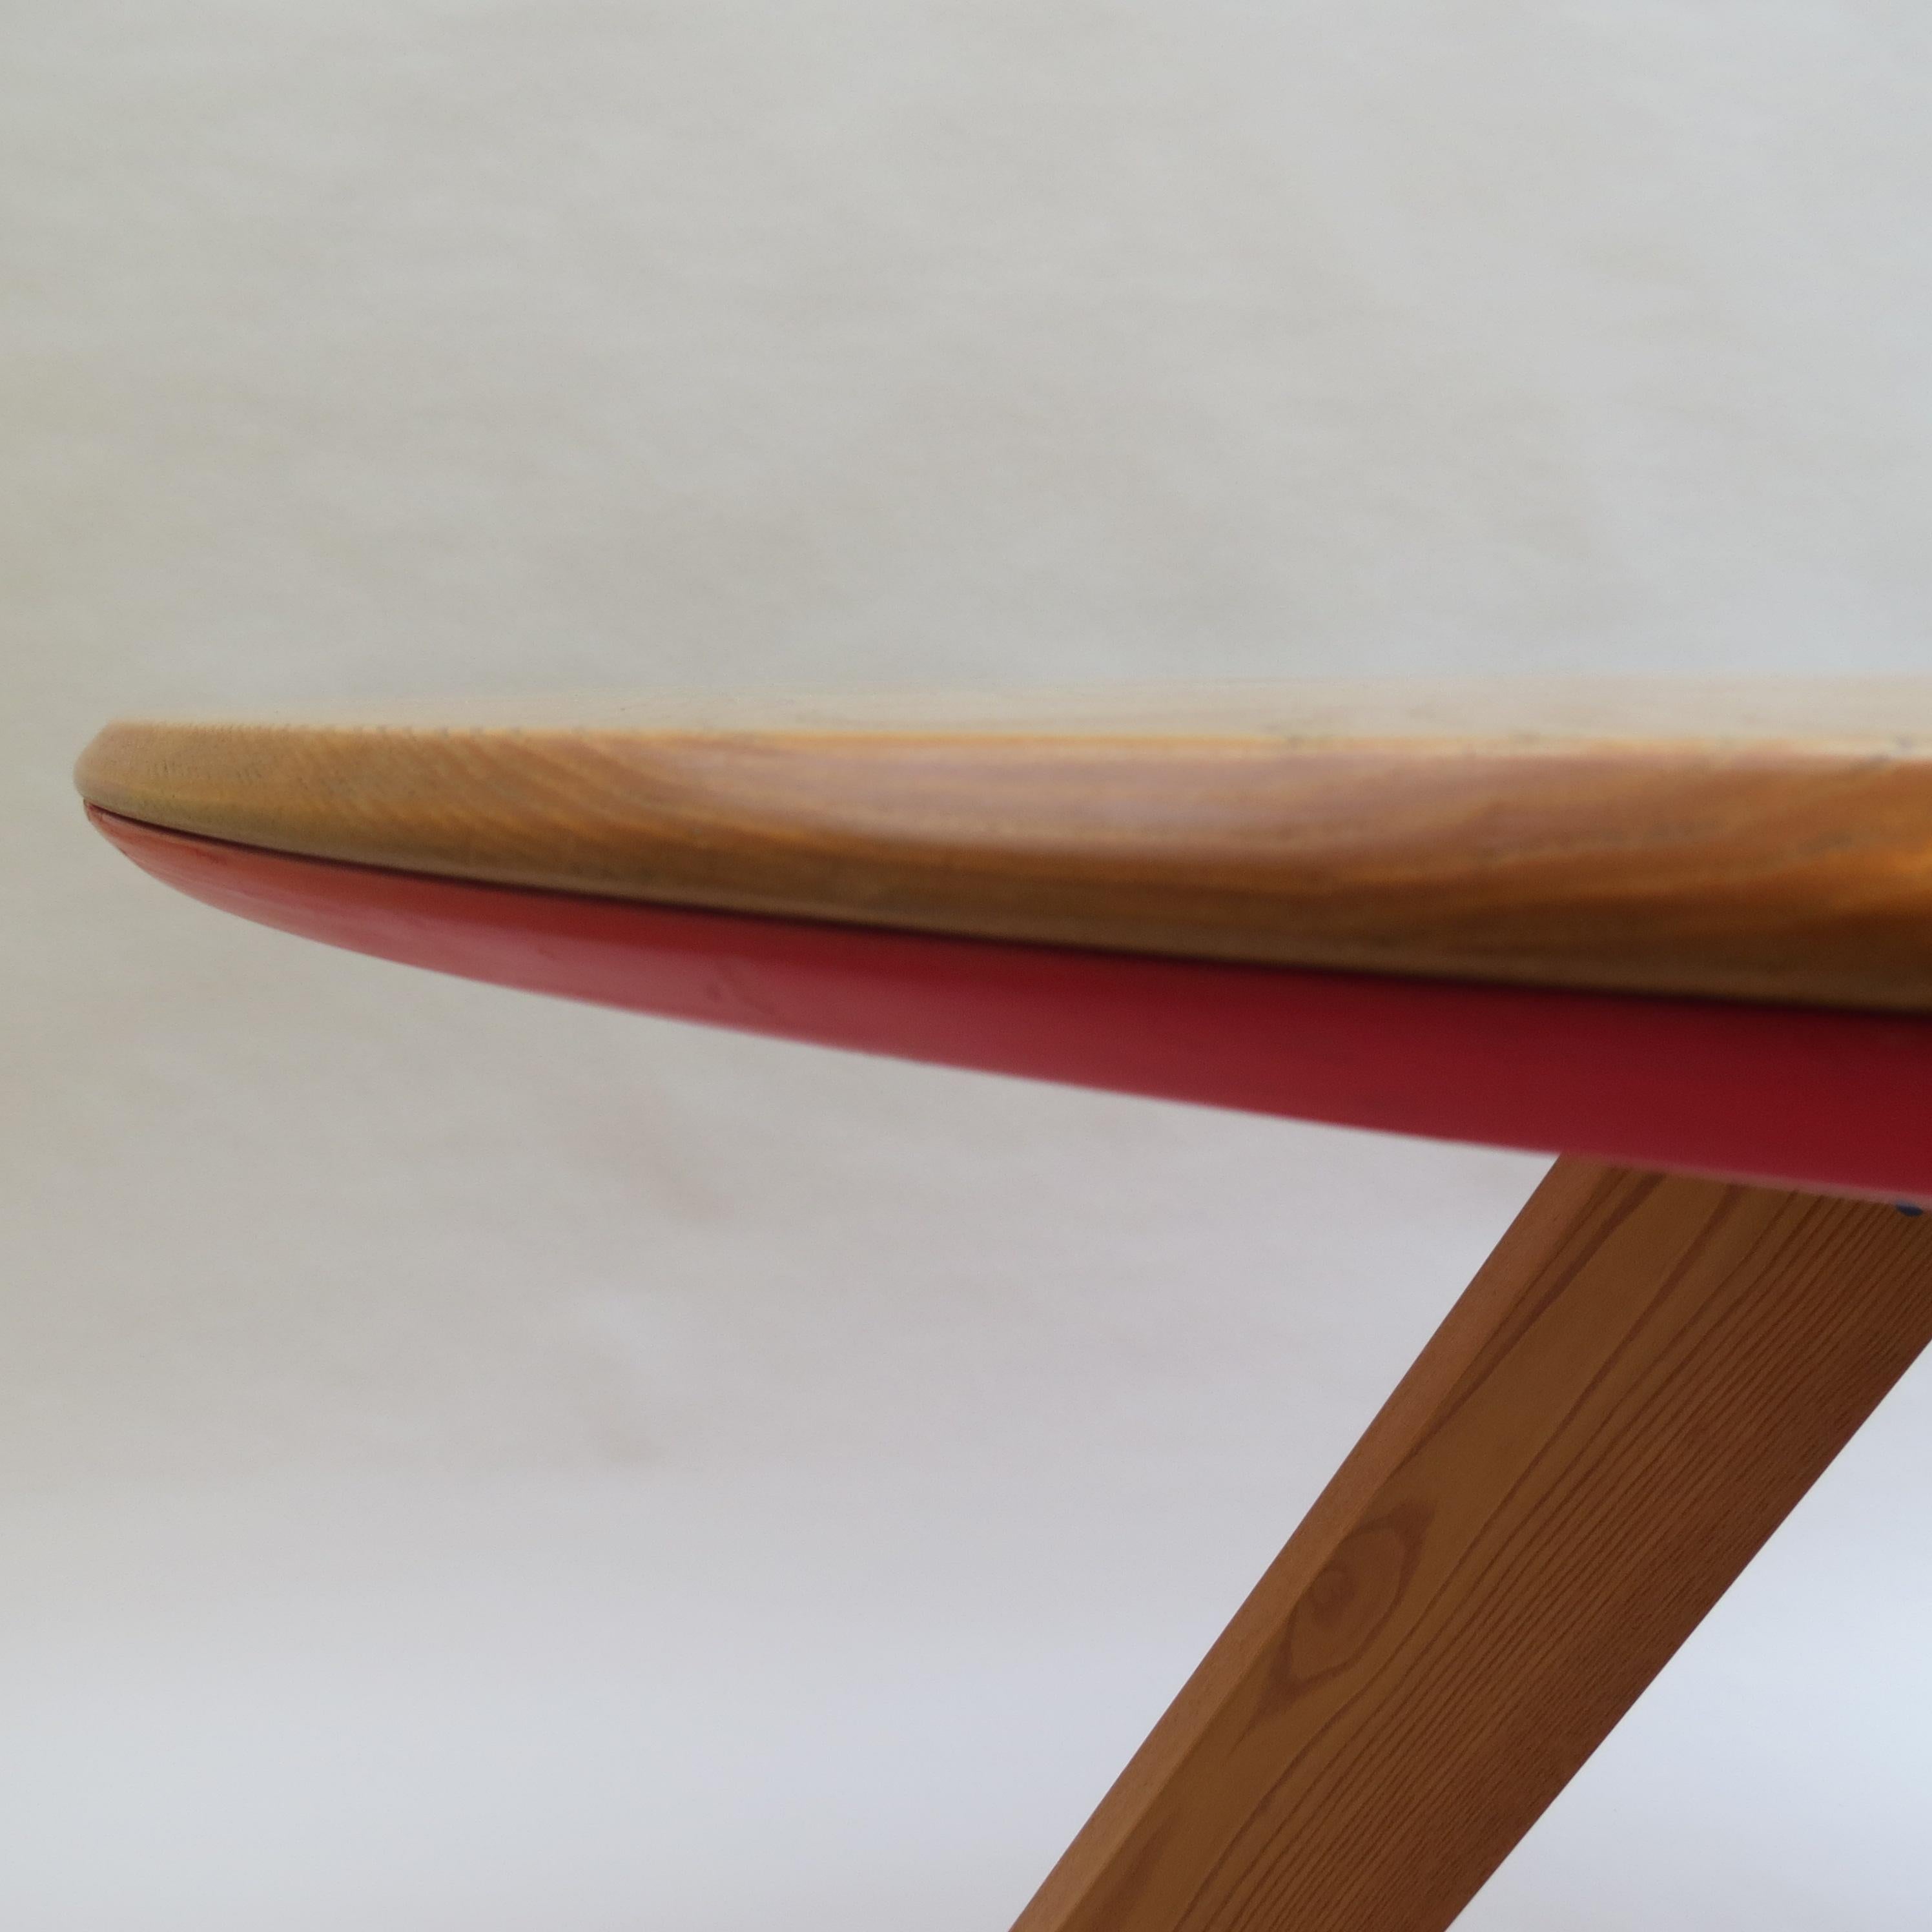 Ash Midcentury Bespoke Round Dining Table by David Field 1980s with Red Blue Detail